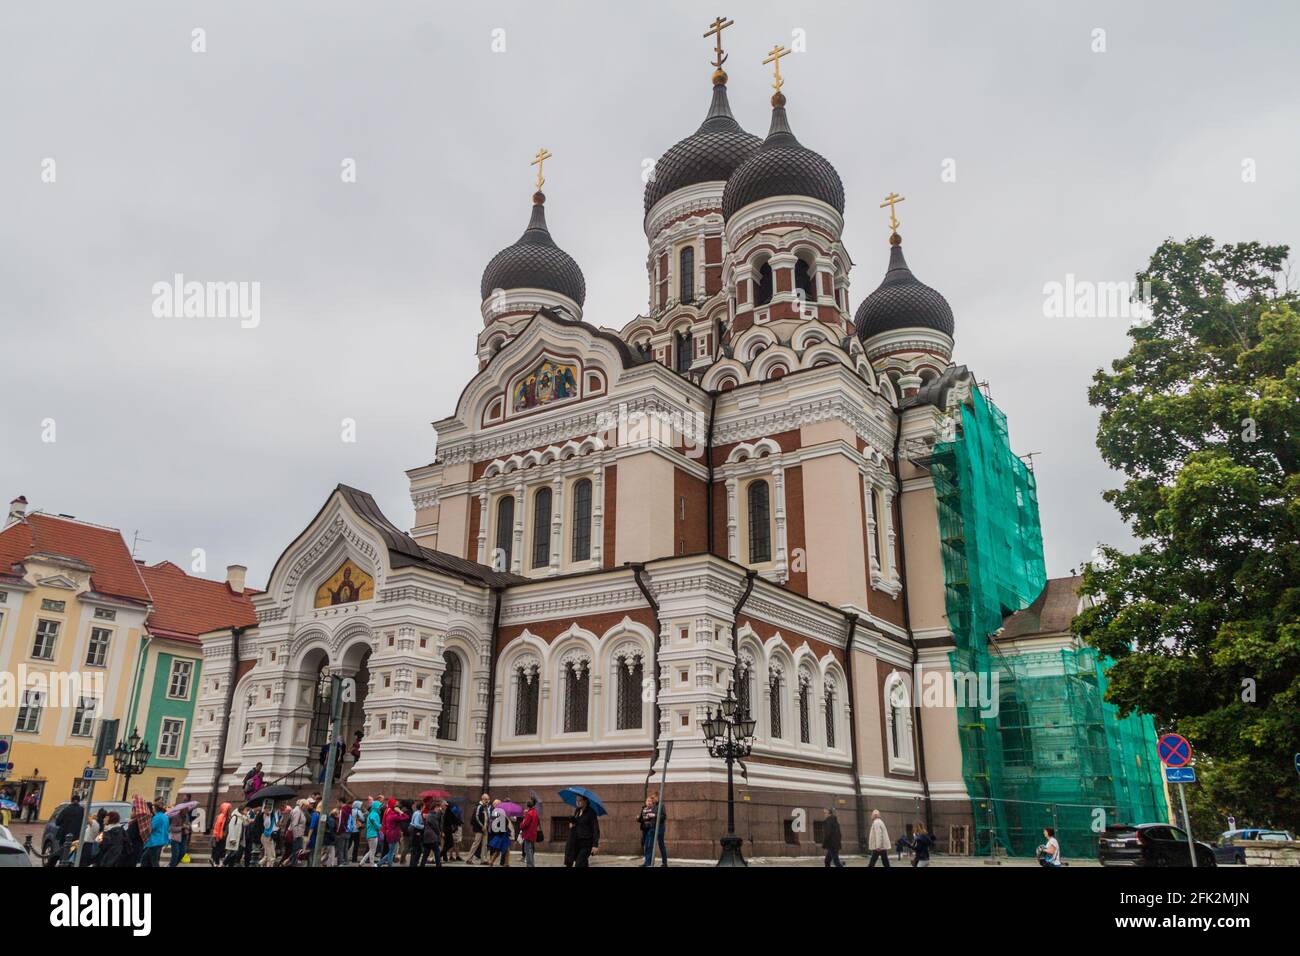 TALLINN, ESTONIA - AUGUST 22, 2016: Crowds of visitors and Alexander Nevsky orthodox cathedral in Tallinn. Stock Photo